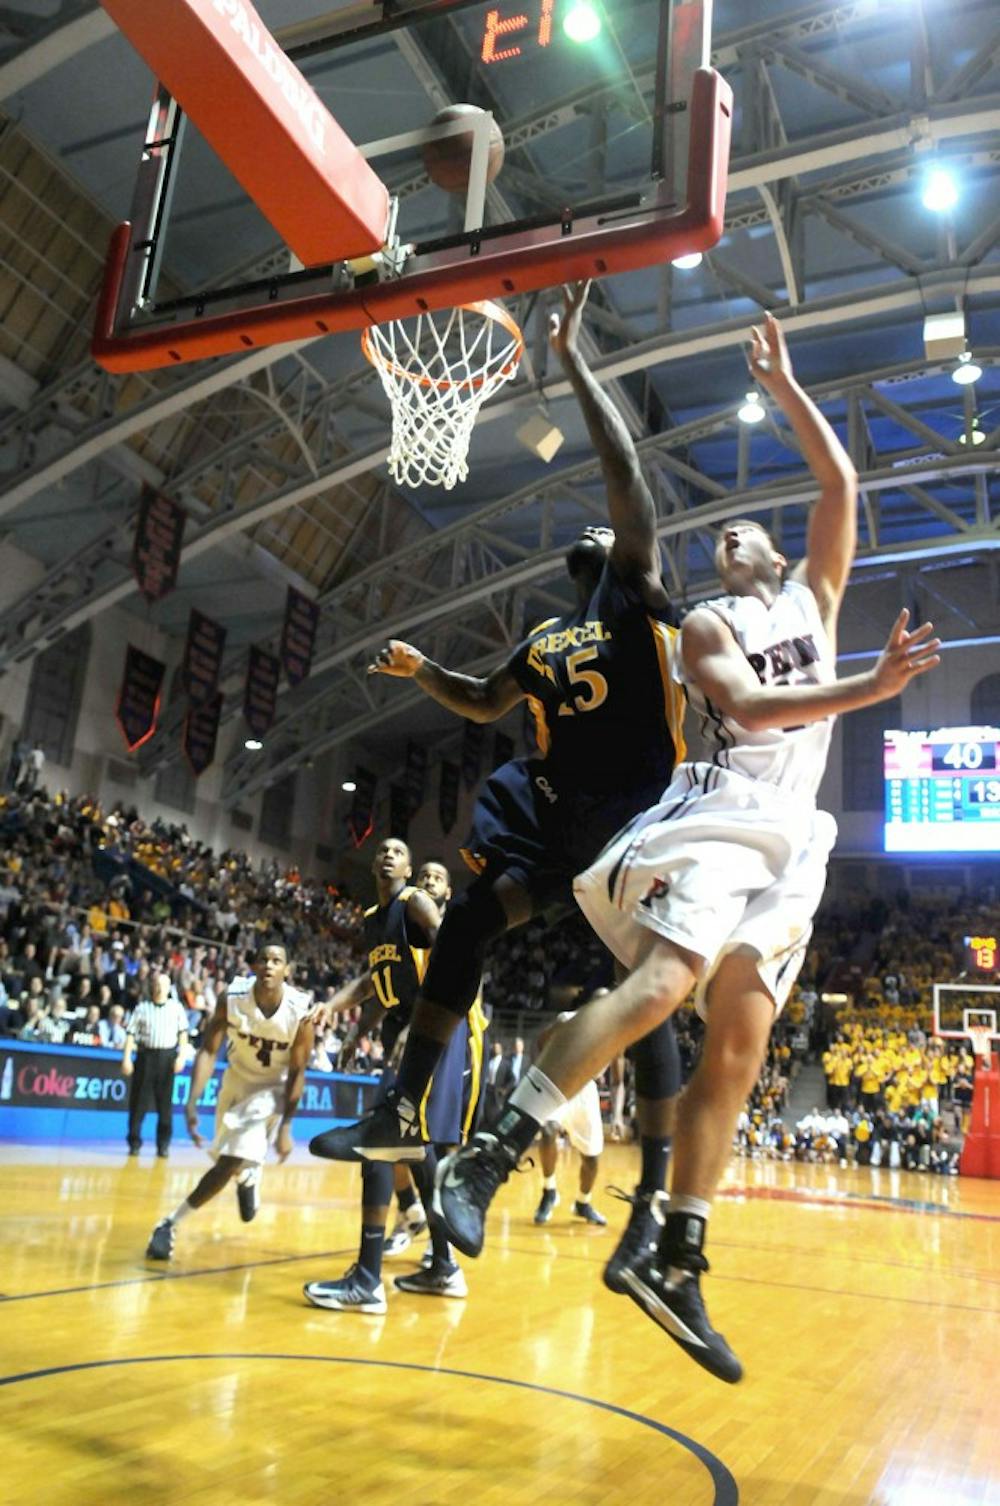 Men's Basketball lost to Drexel 59 - 61